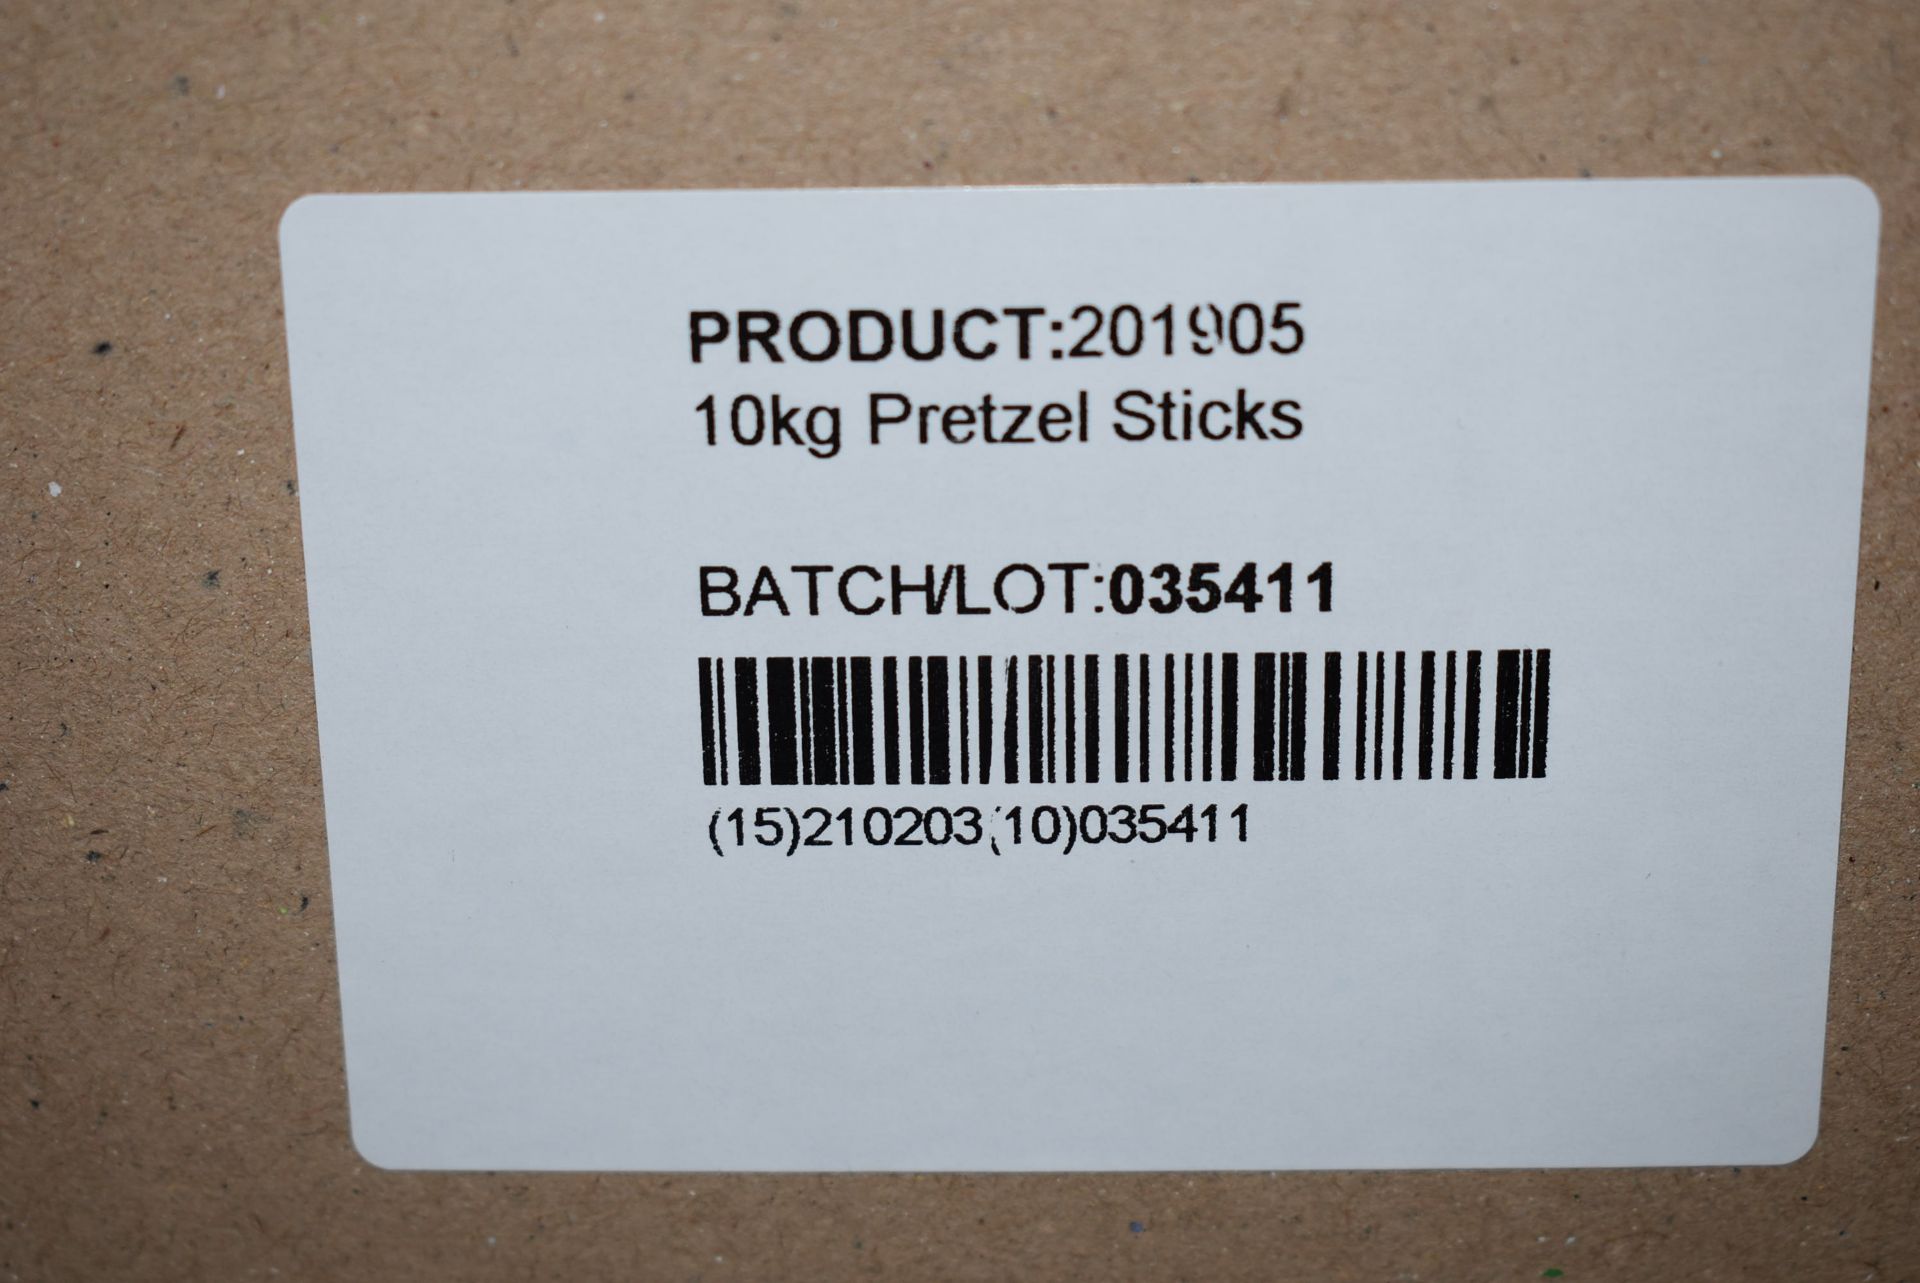 *Eight Boxes Containing 10kg of Pretzel Sticks BBD: 03/02/2021 - Image 2 of 2